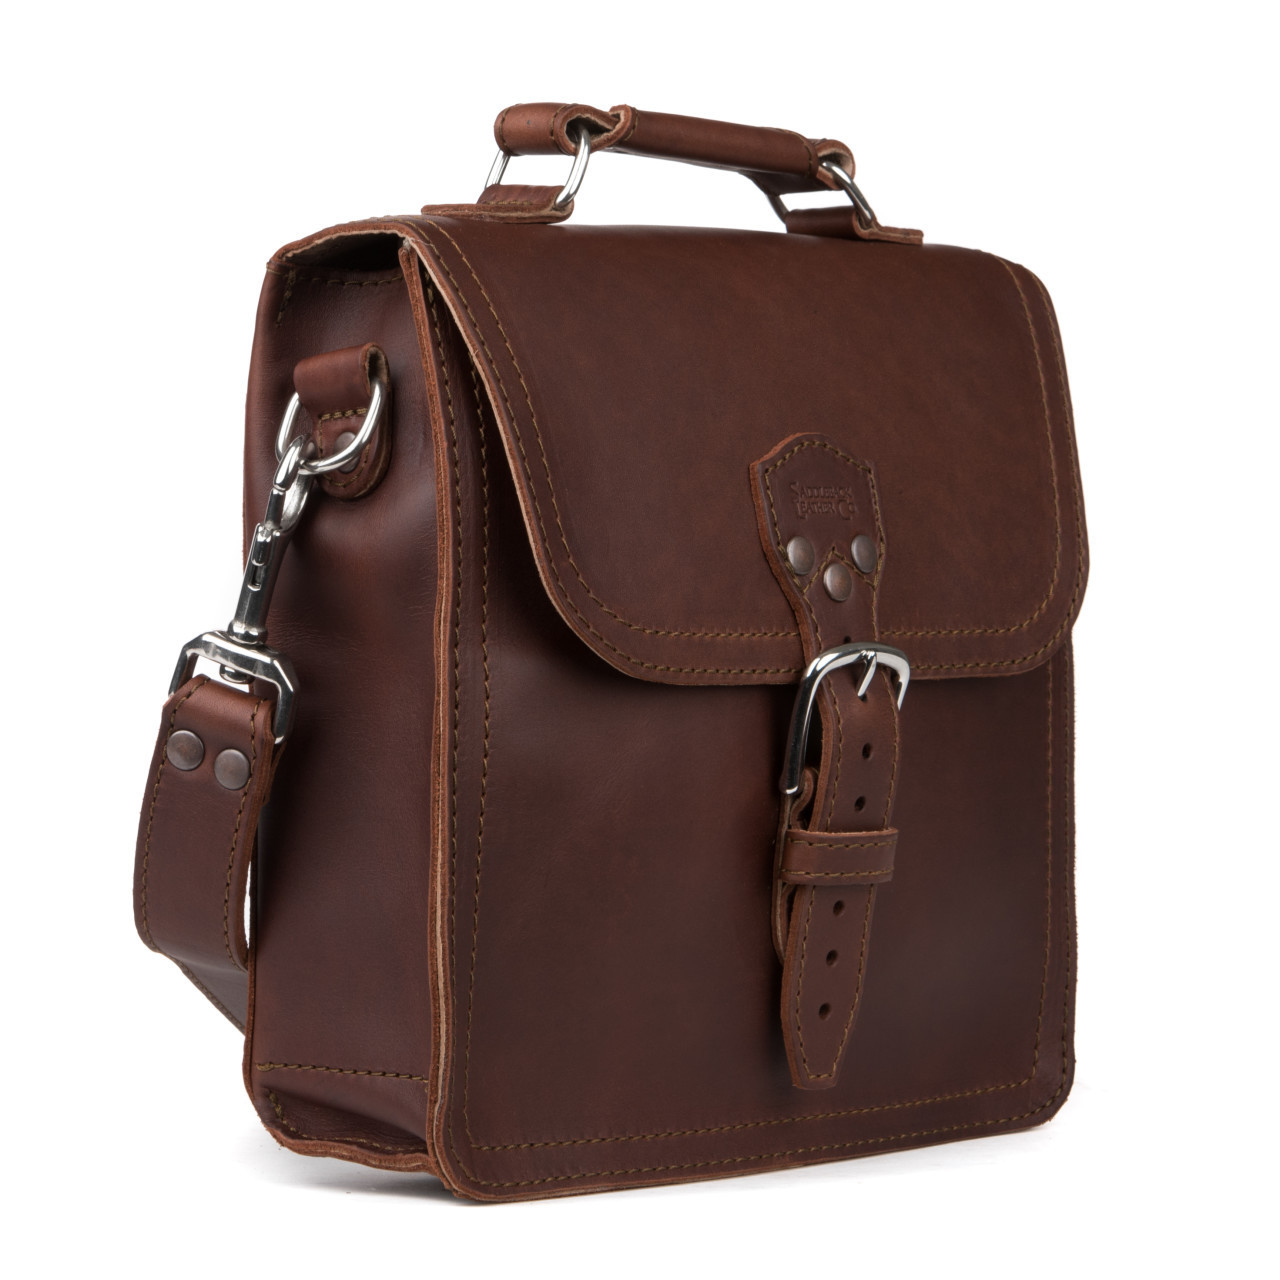 The Sereno | Classic Leather Man Bag – The Real Leather Company